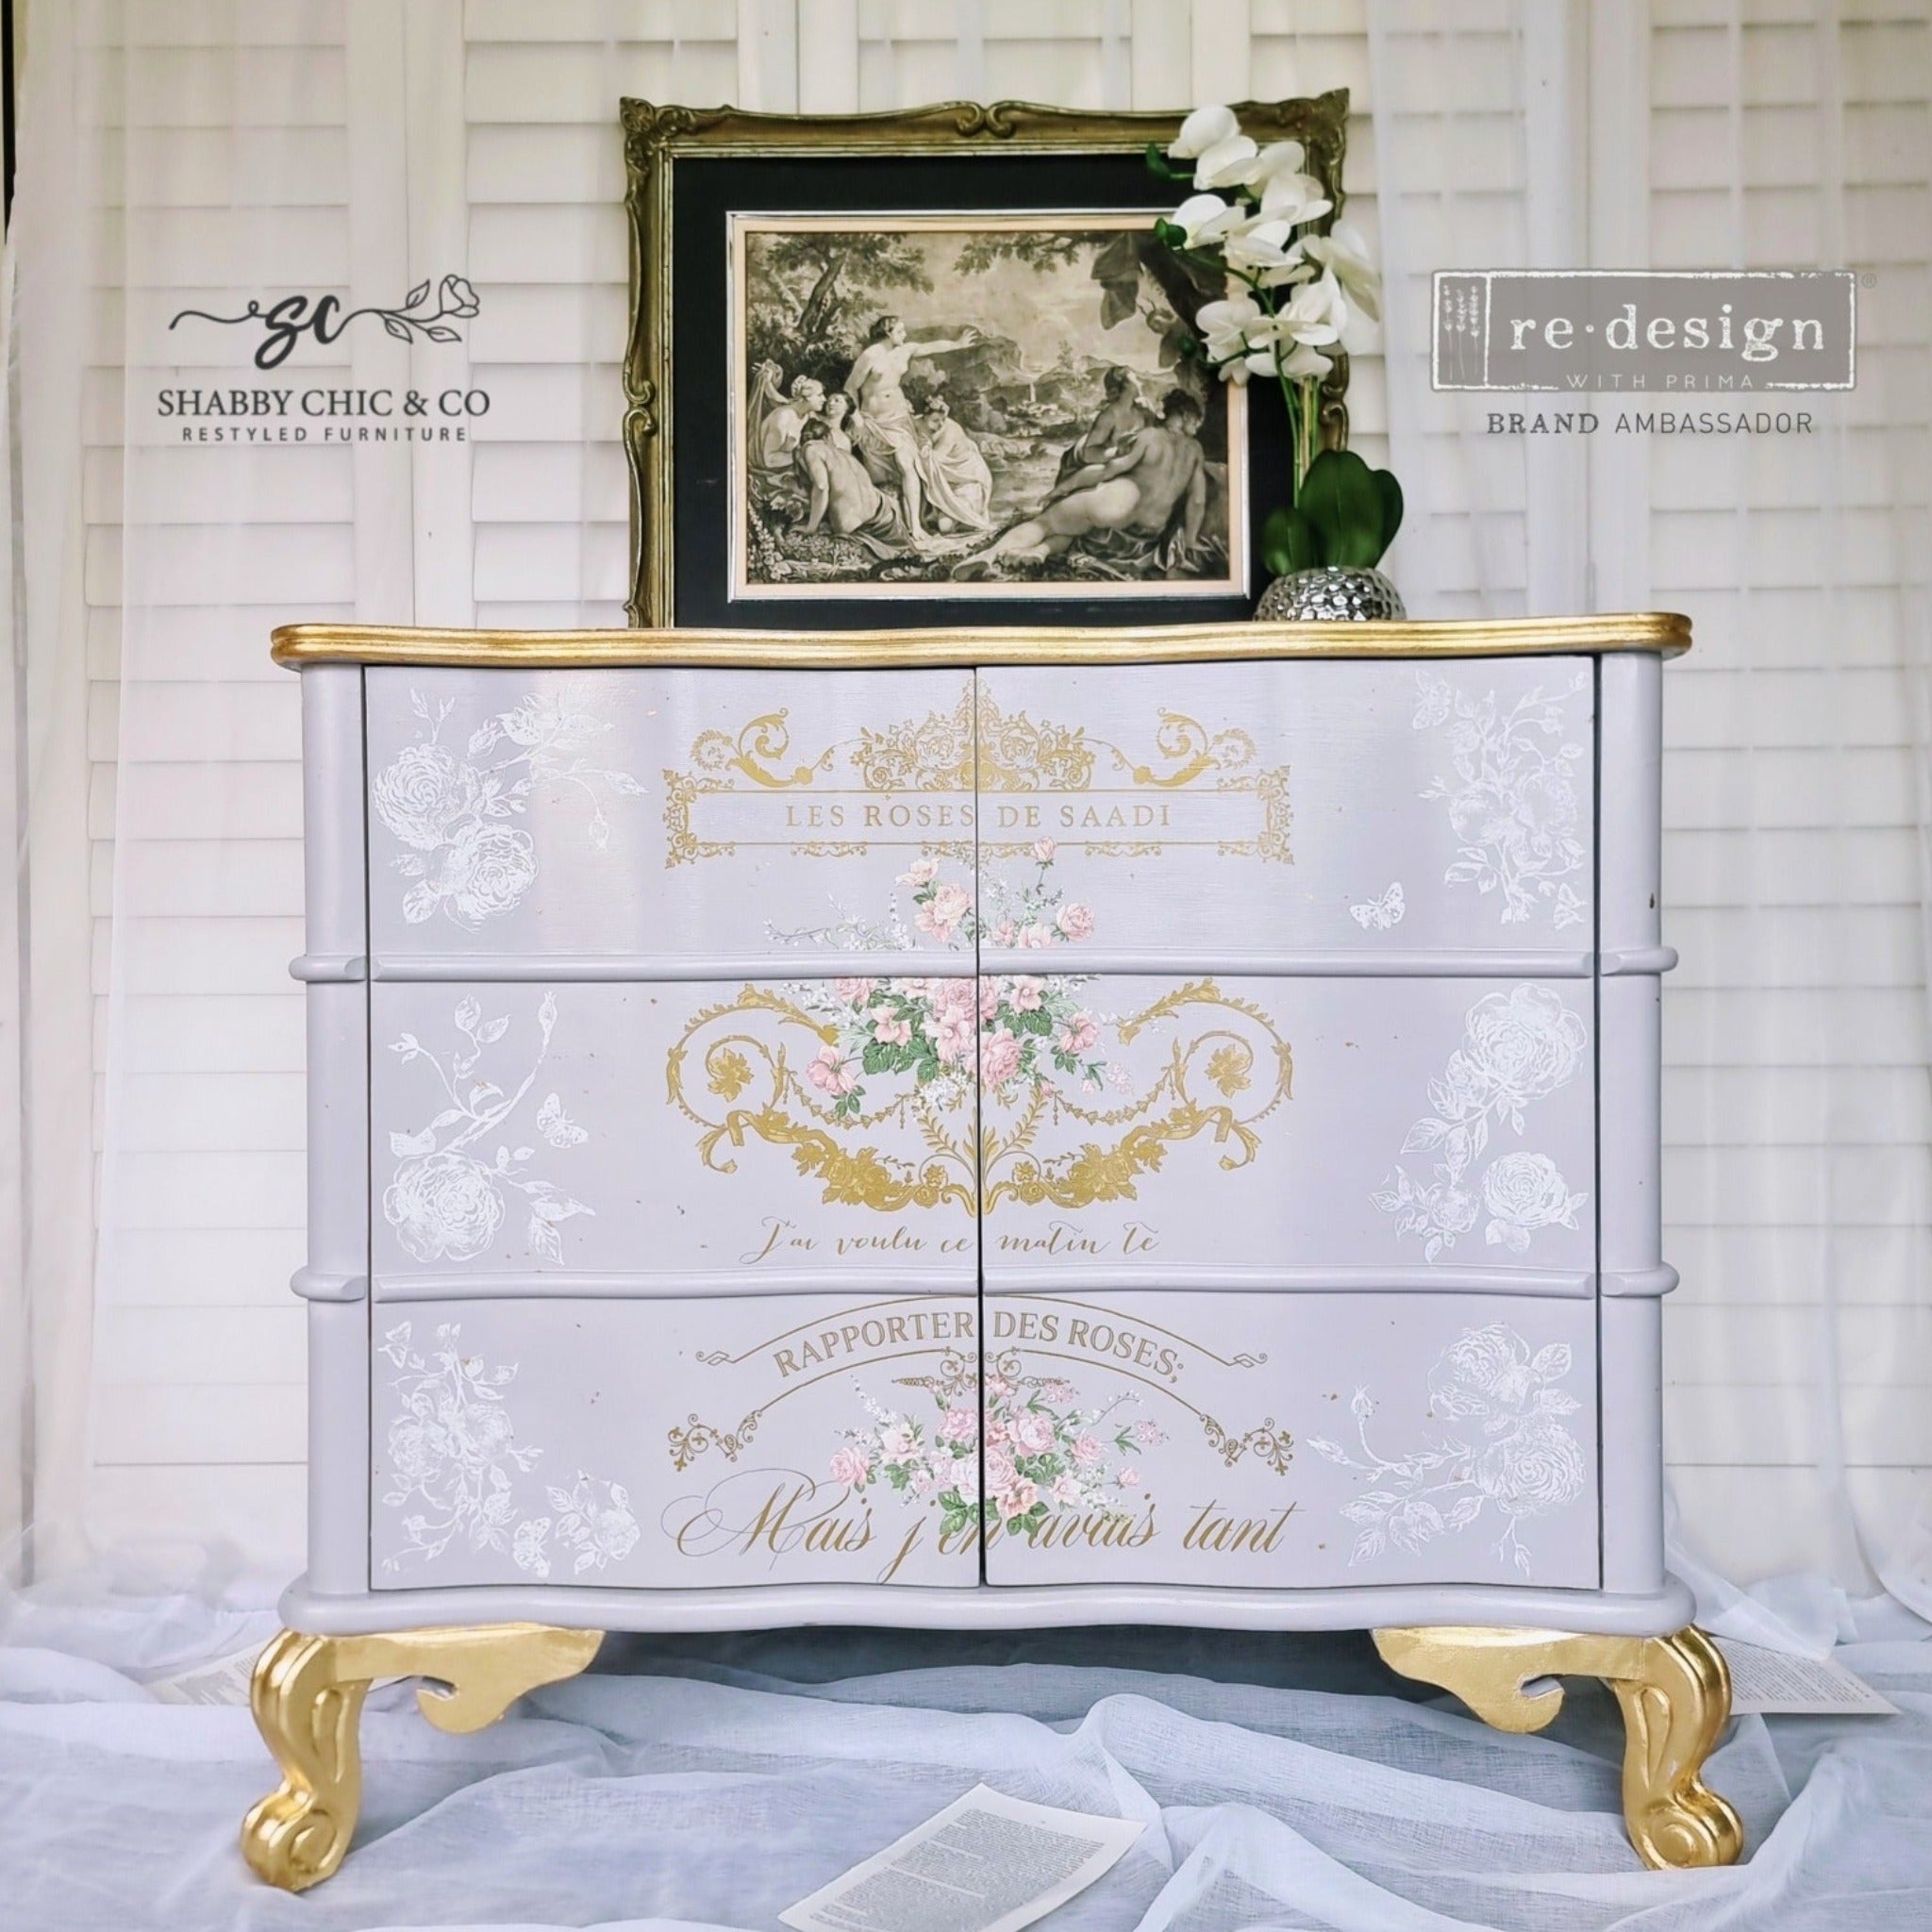 A vintage 6 drawer dresser refurbished by Shabby Chic & Co. is painted light grey with gold accents and features ReDesign with Prima's Kacha Les Roses transfer down the center of the dresser.